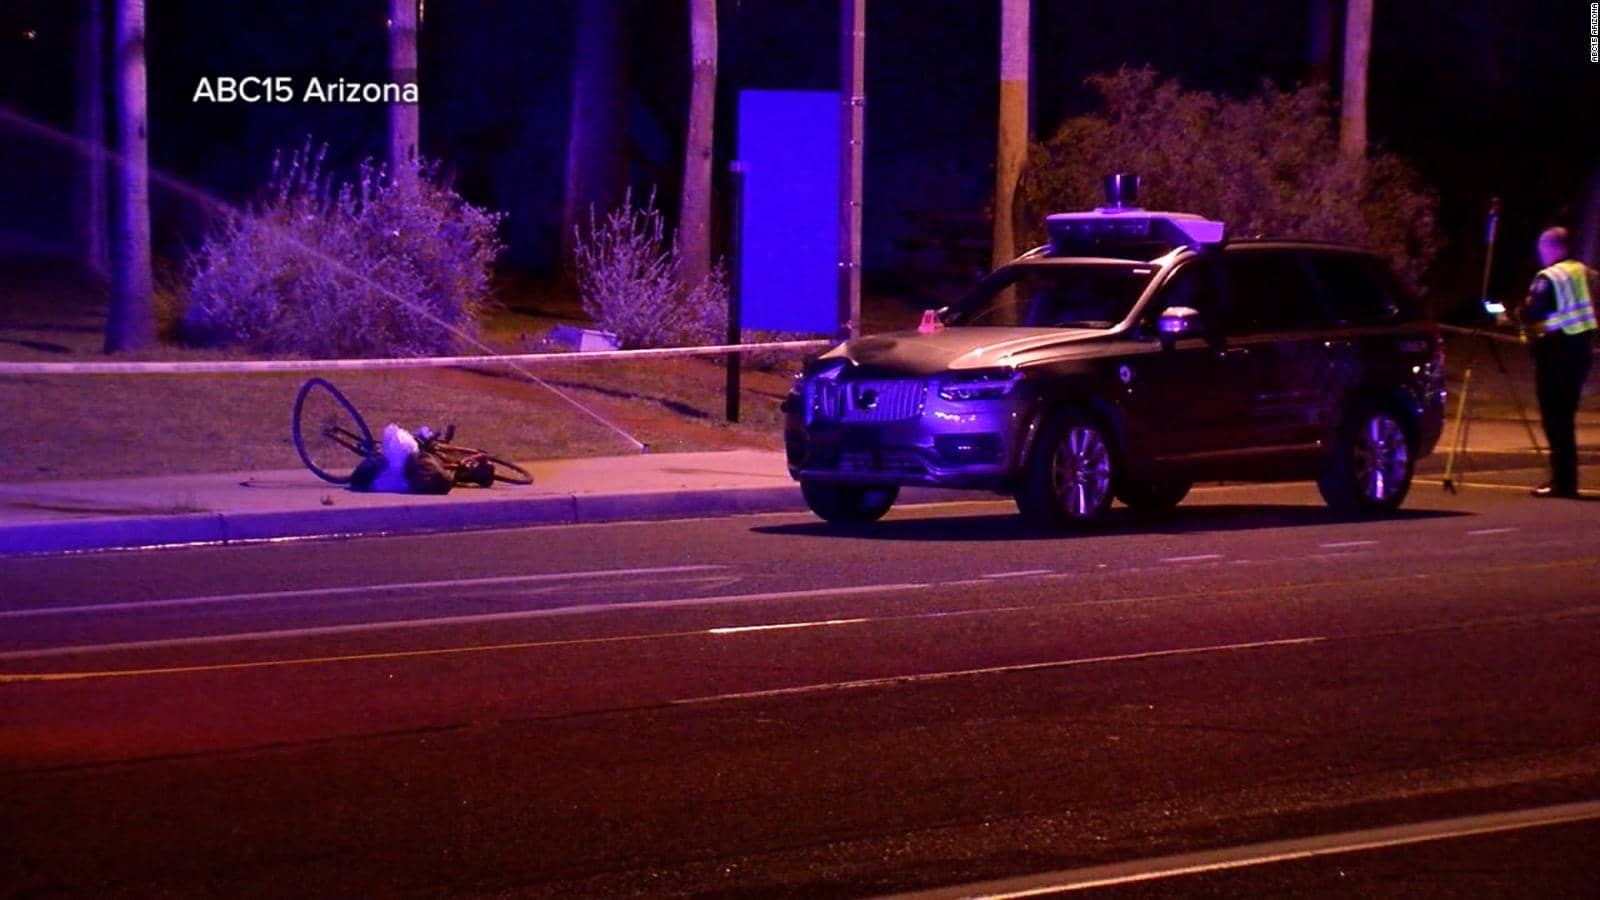 Safety Driver in Uber Autonomous Vehicle Was Streaming "The Voice" on Her Phone Just Before Fatal Arizona Pedestrian Accident image courtesy of https://www.cnn.com/videos/cnnmoney/2018/03/19/uber-self-driving-autonomous-crash-arizona-pedestrian-dead-cnnmoney-orig.cnnmoney